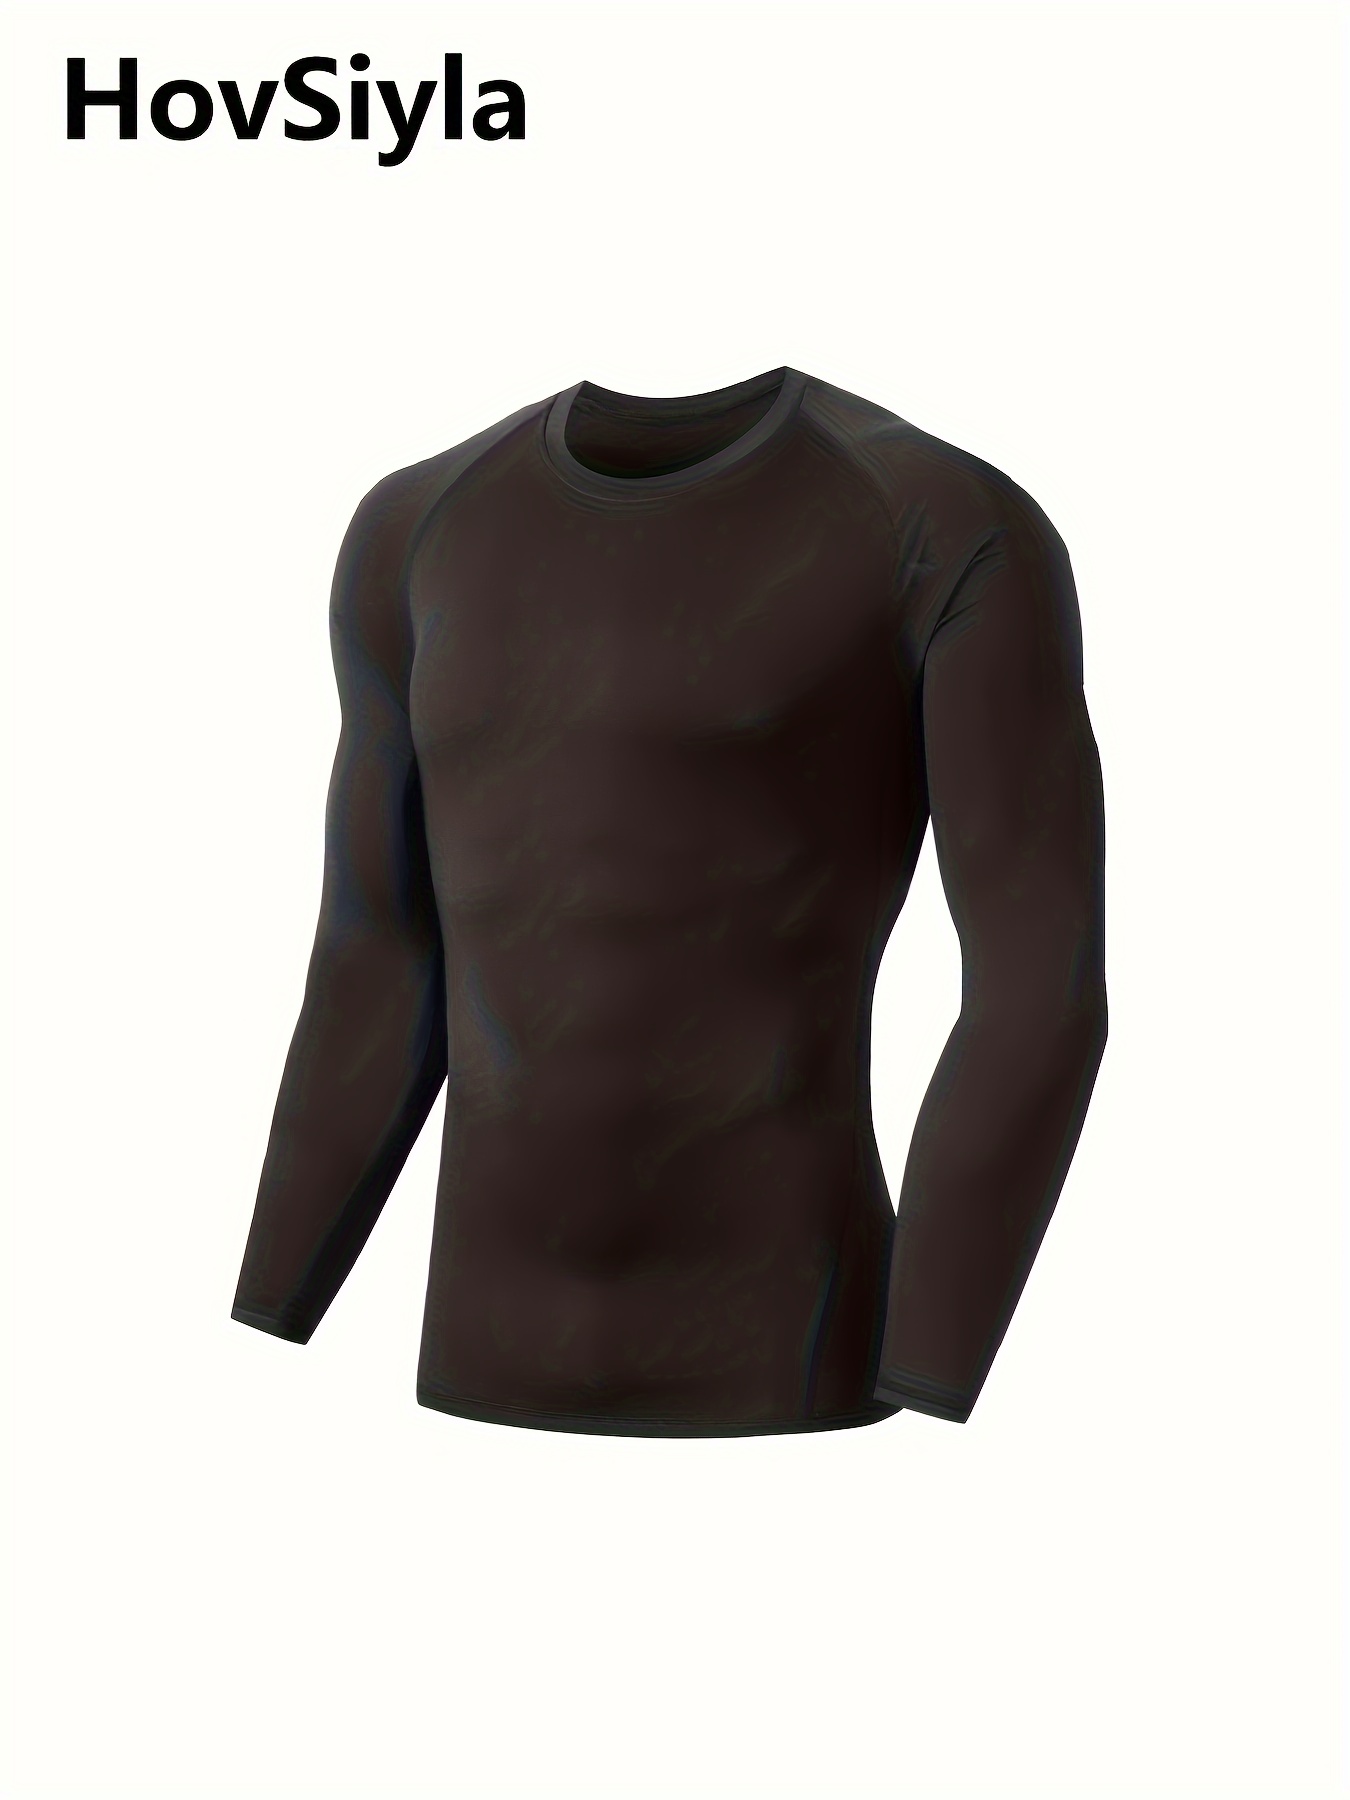 Men's Breathable Quick drying Running Sports Set Long Sleeve